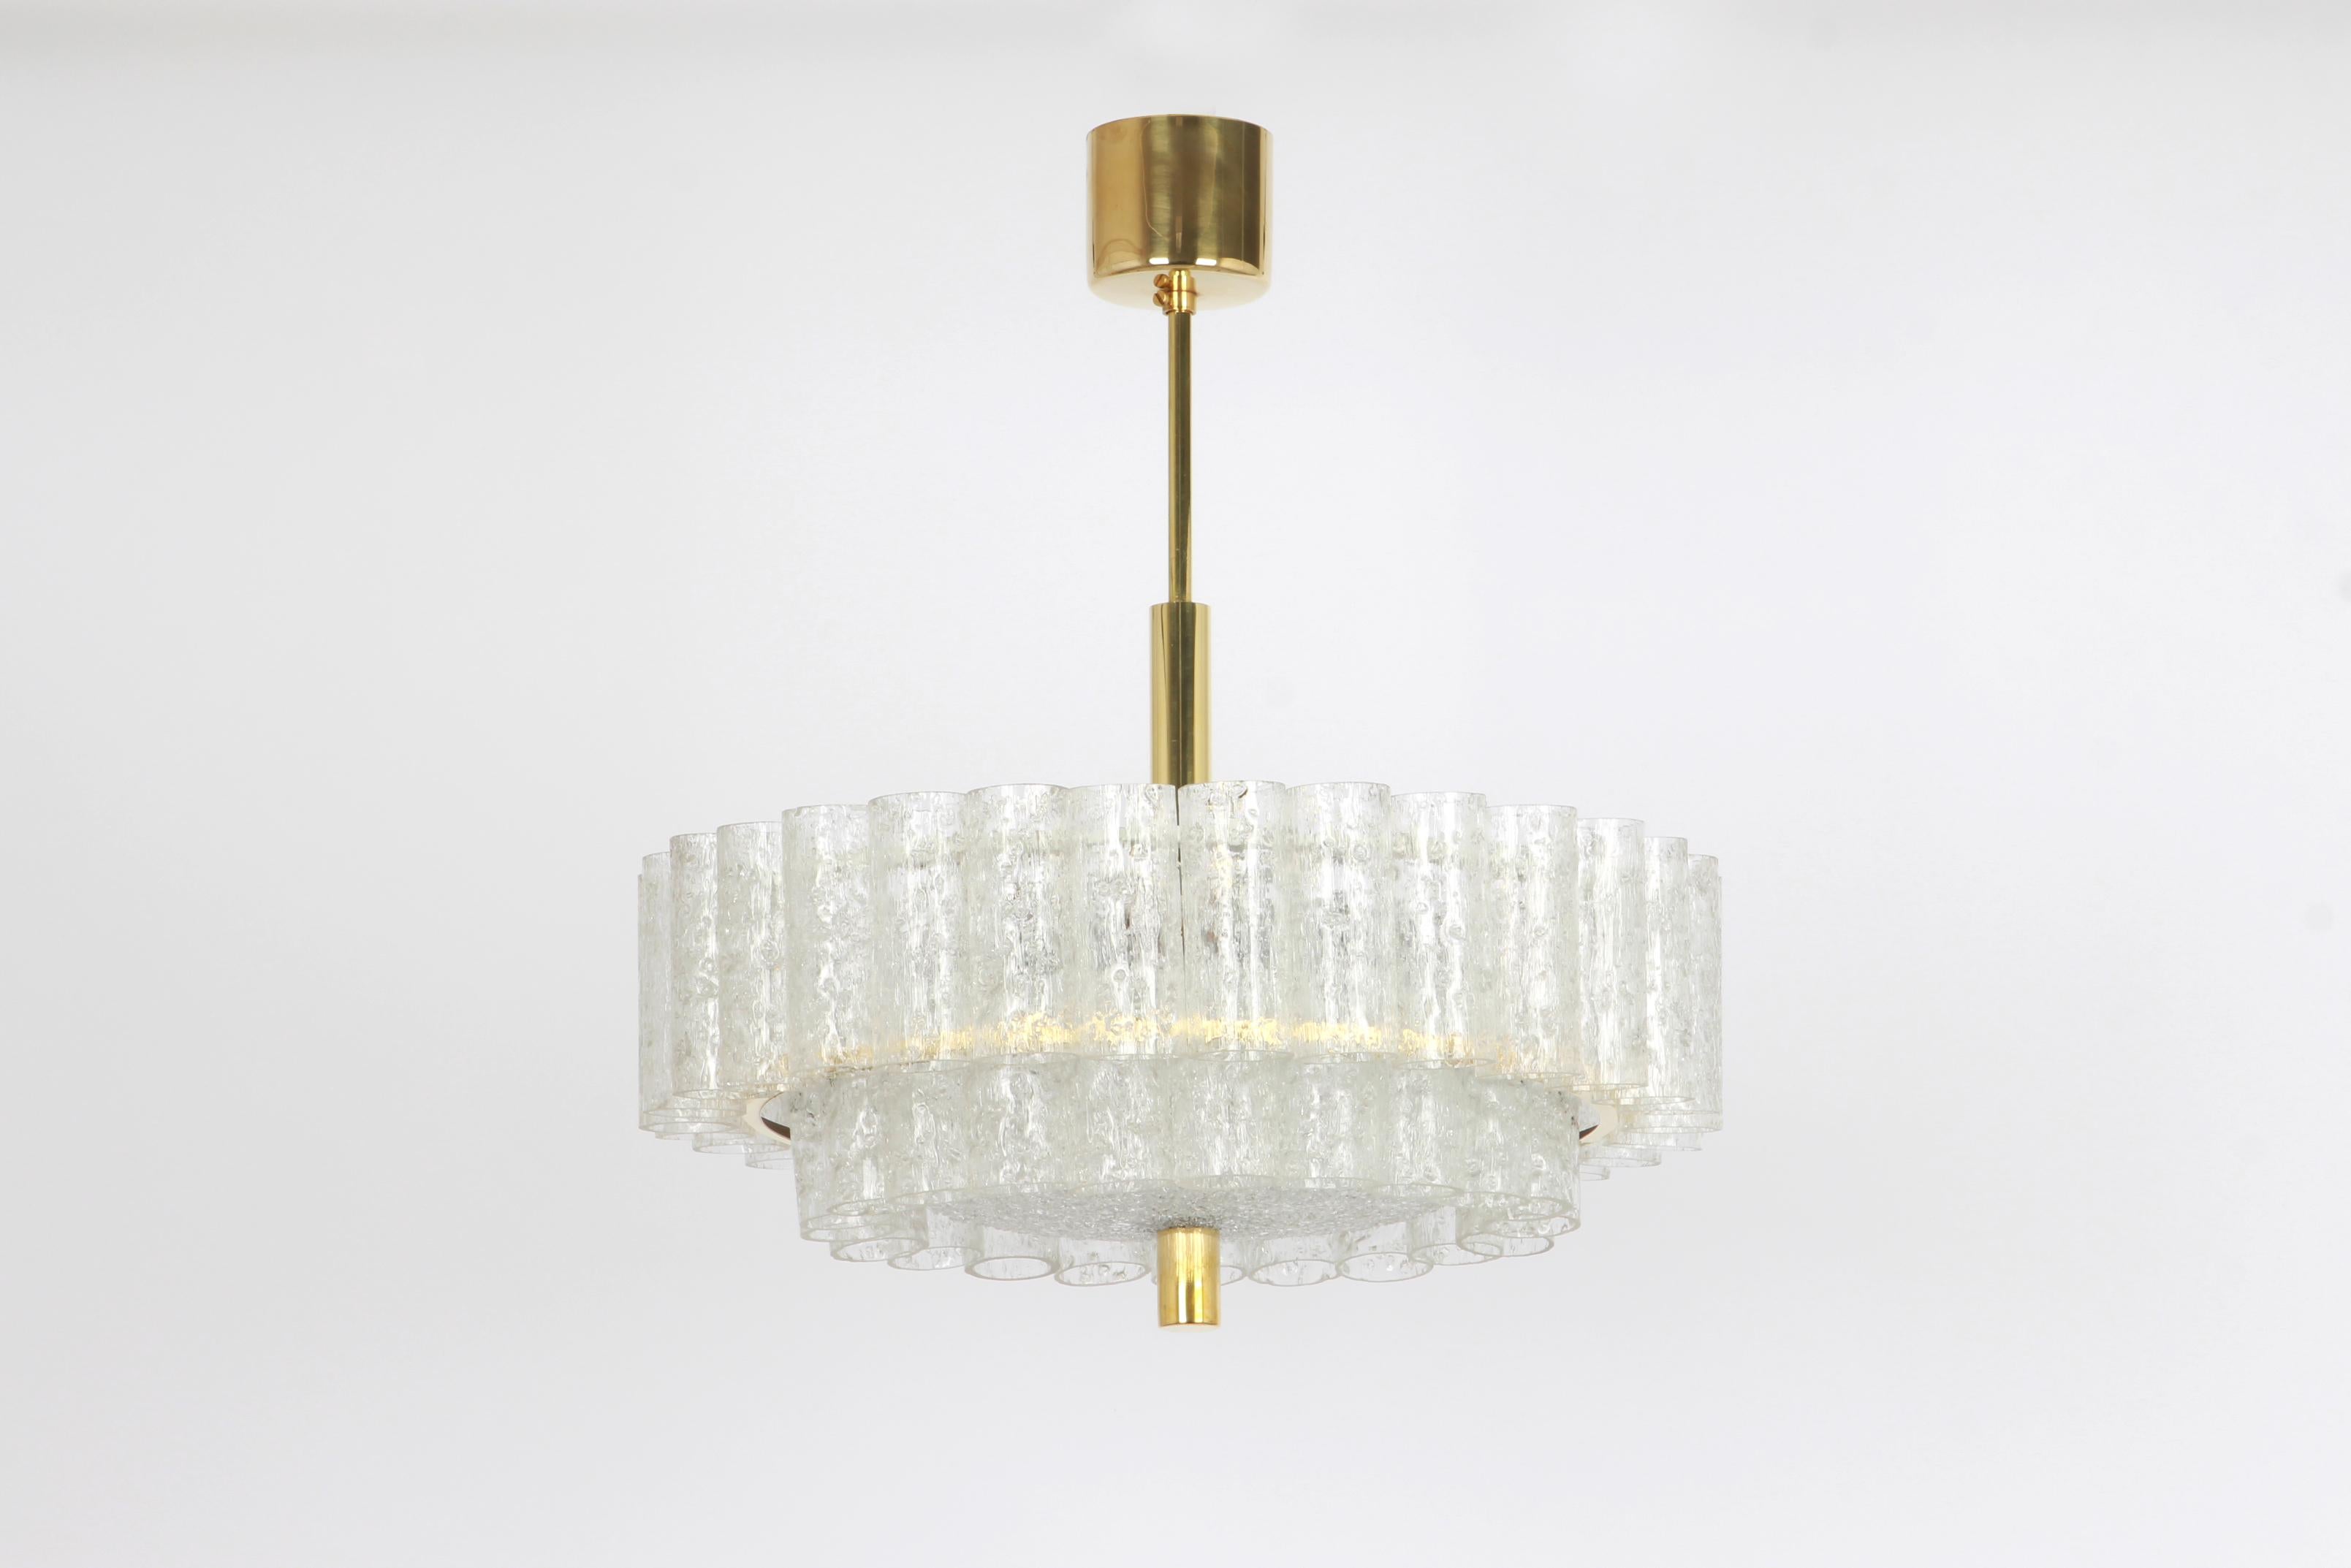 1 of 2 Fantastic two-tier midcentury chandeliers by Doria, Germany, manufactured circa 1960-1969. Two rings of Murano glass cylinders suspended from a fixture.

Heavy quality and in very good condition. Cleaned, well-wired and ready to use. 

The